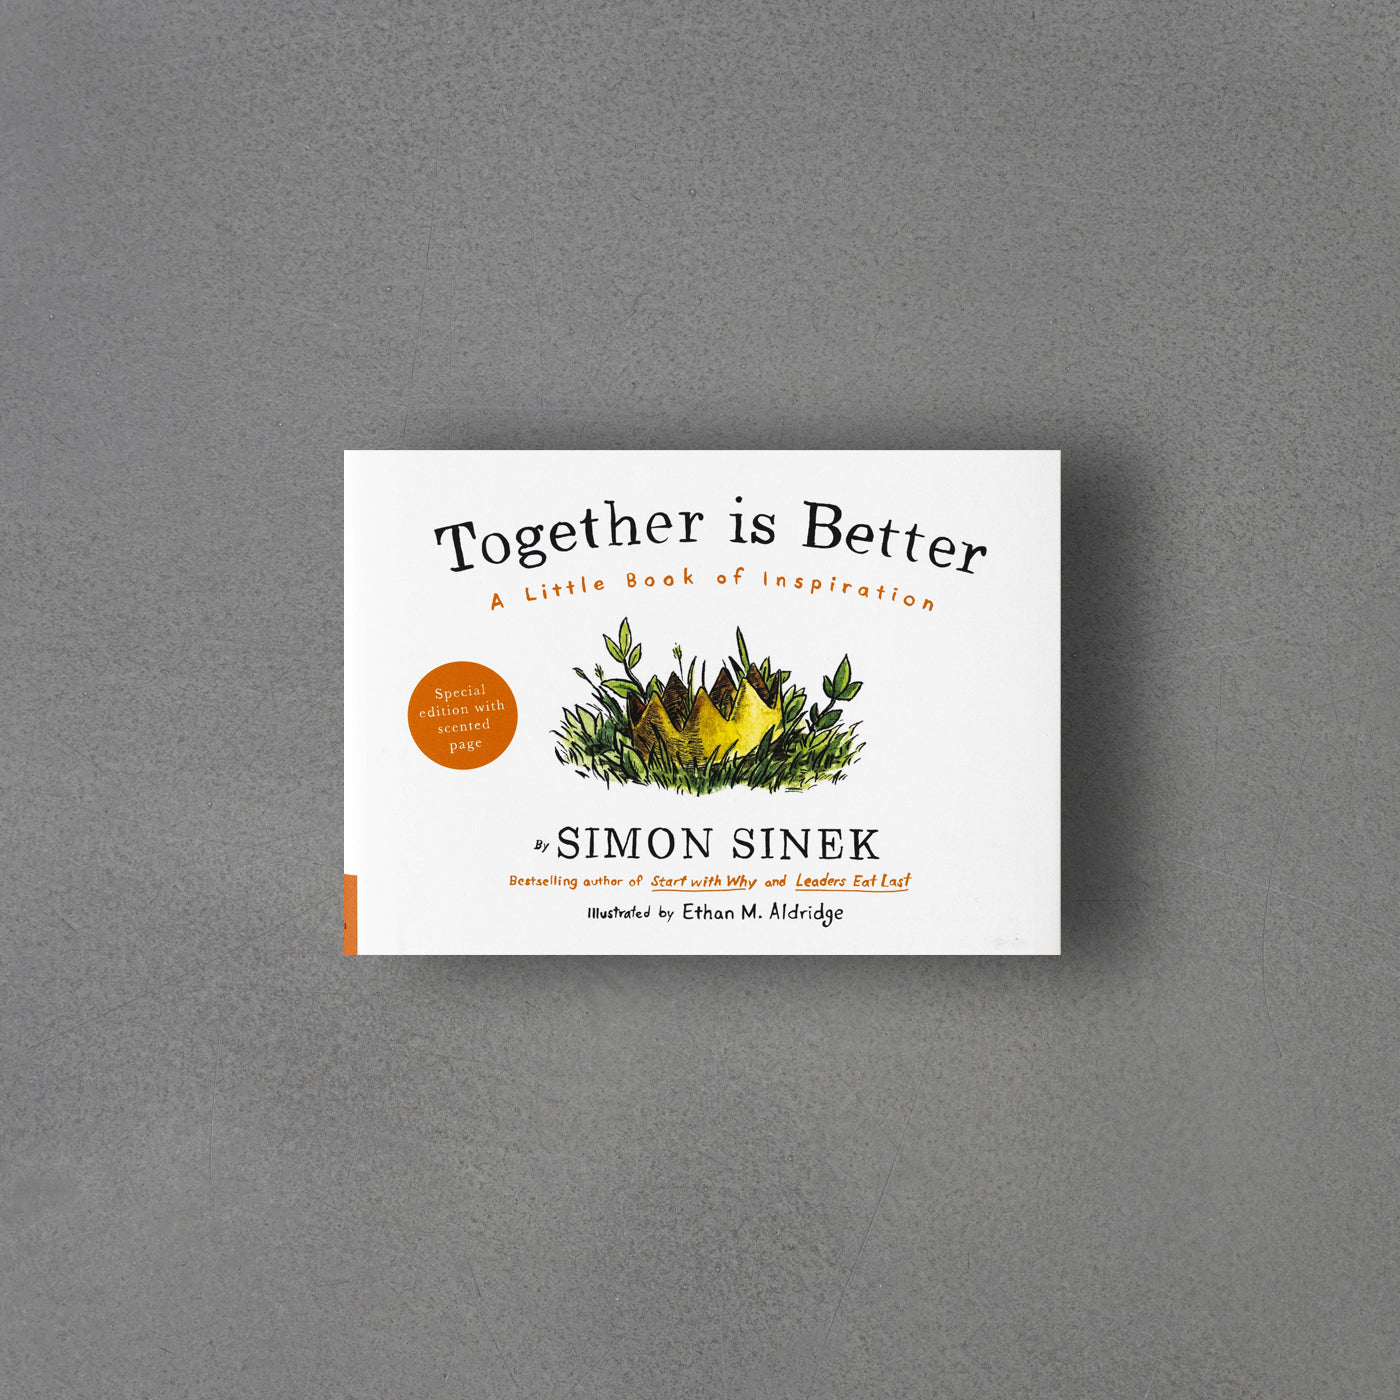 Together is Better : A Little Book of Inspiration, Simon Sinek